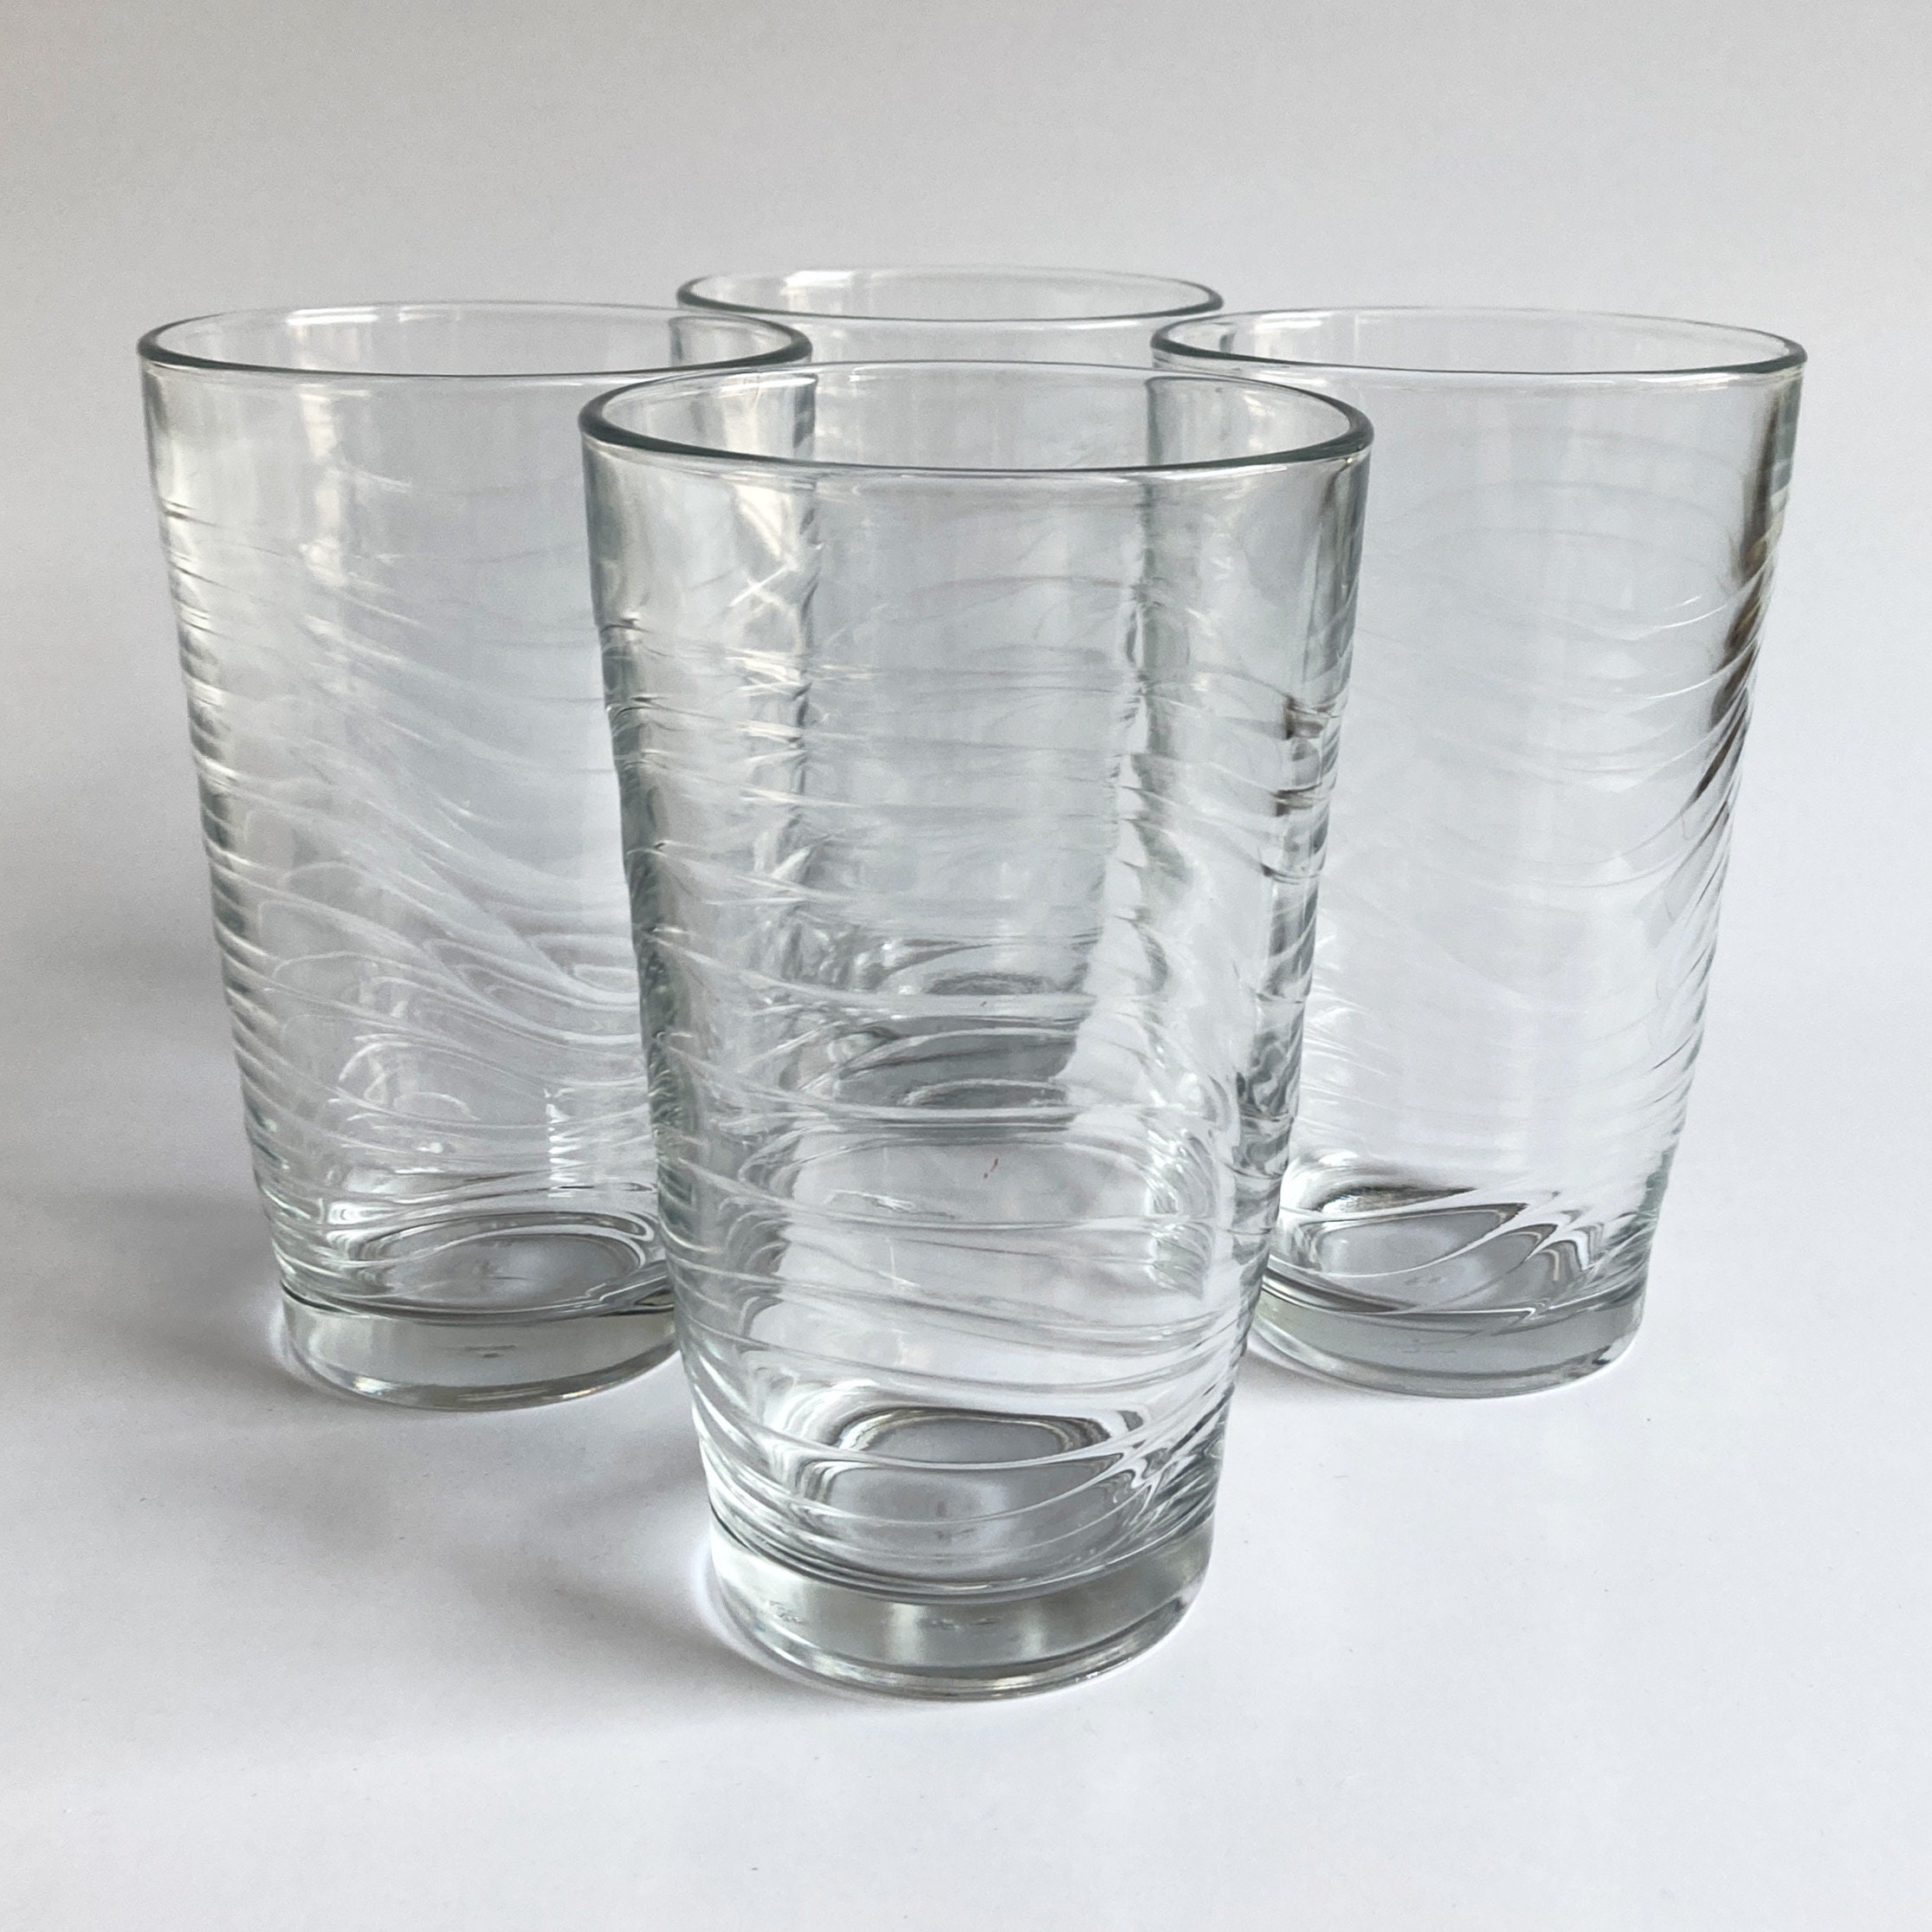 ERINGOGO Wavy Glass Cup - Creative Drinking Glasses, Ripple Glass Cup  Bubble Glass Mug Vintage Bever…See more ERINGOGO Wavy Glass Cup - Creative